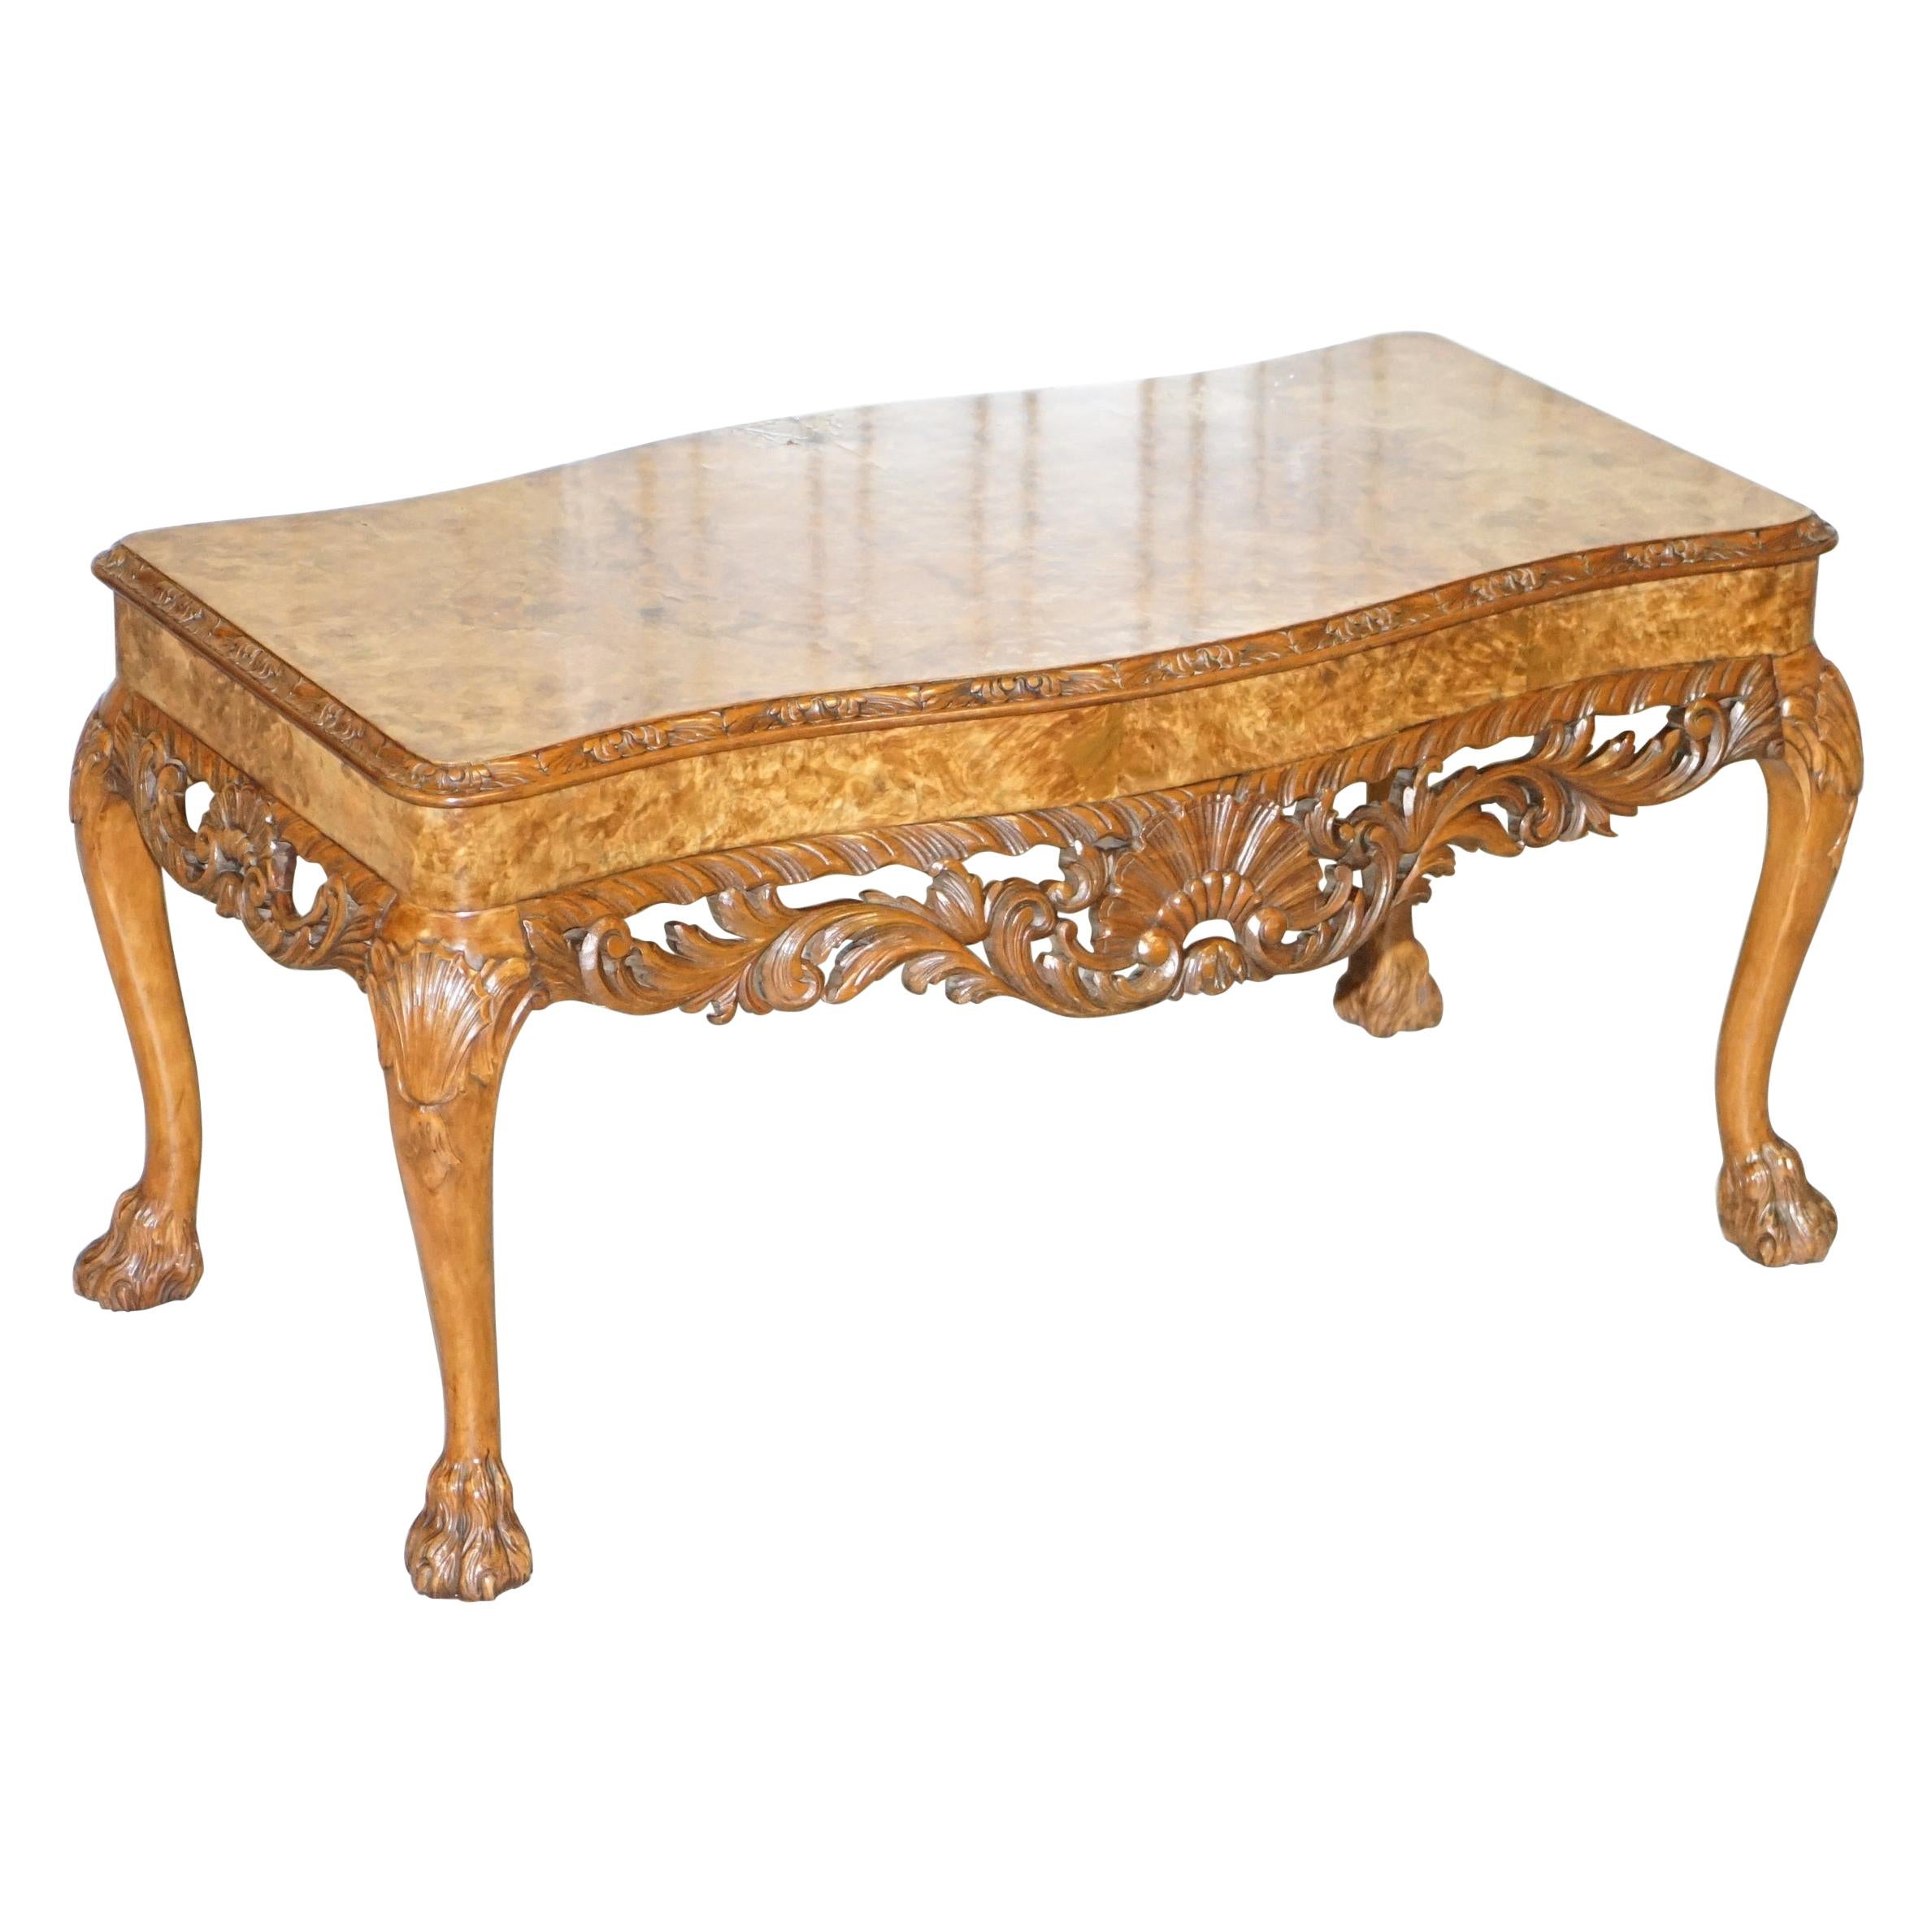 Stunning Vintage Burr Walnut Coffee Table with Ornately Carved Frame Lion Feet